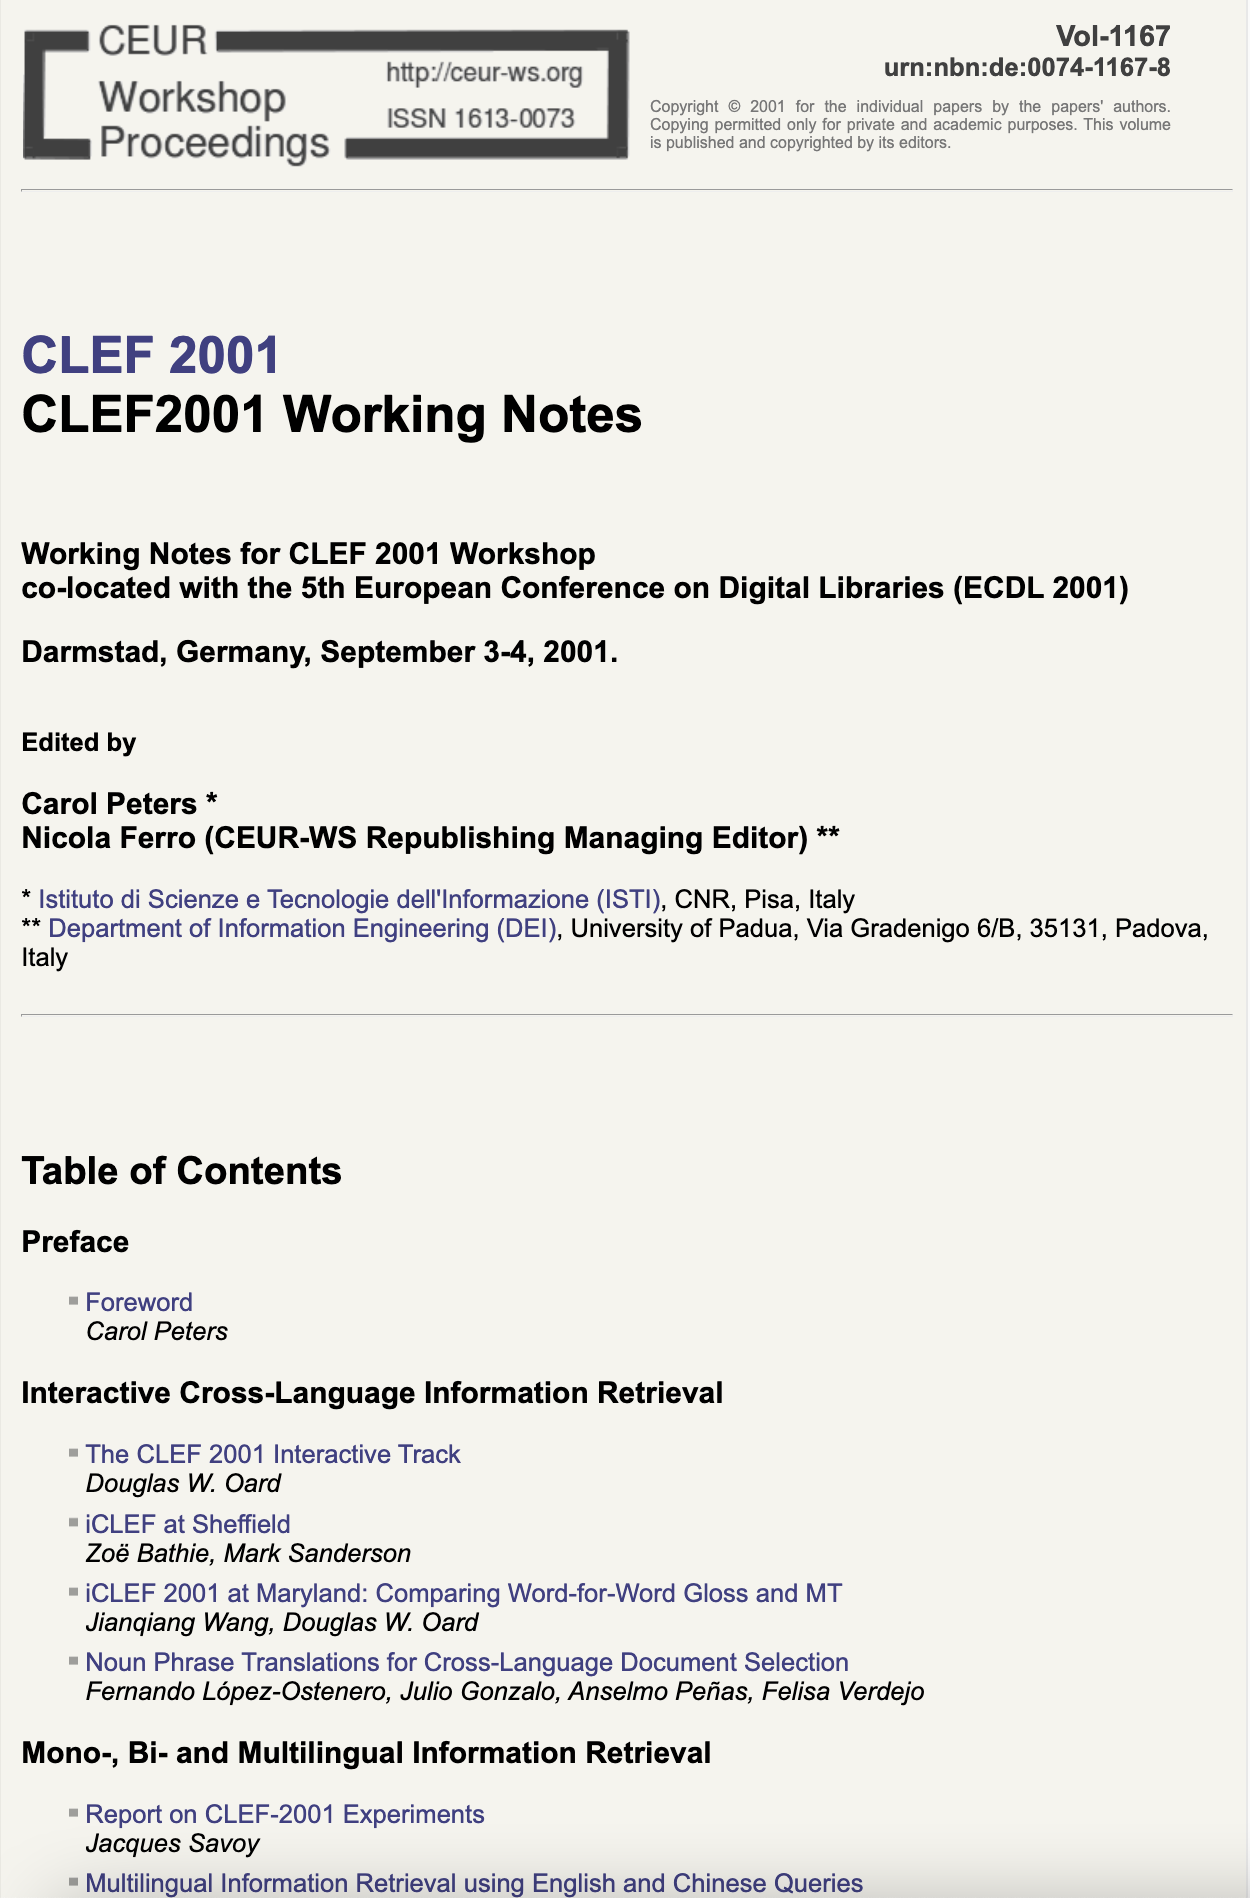 CLEF 2001 CEUR-WS Working Notes page